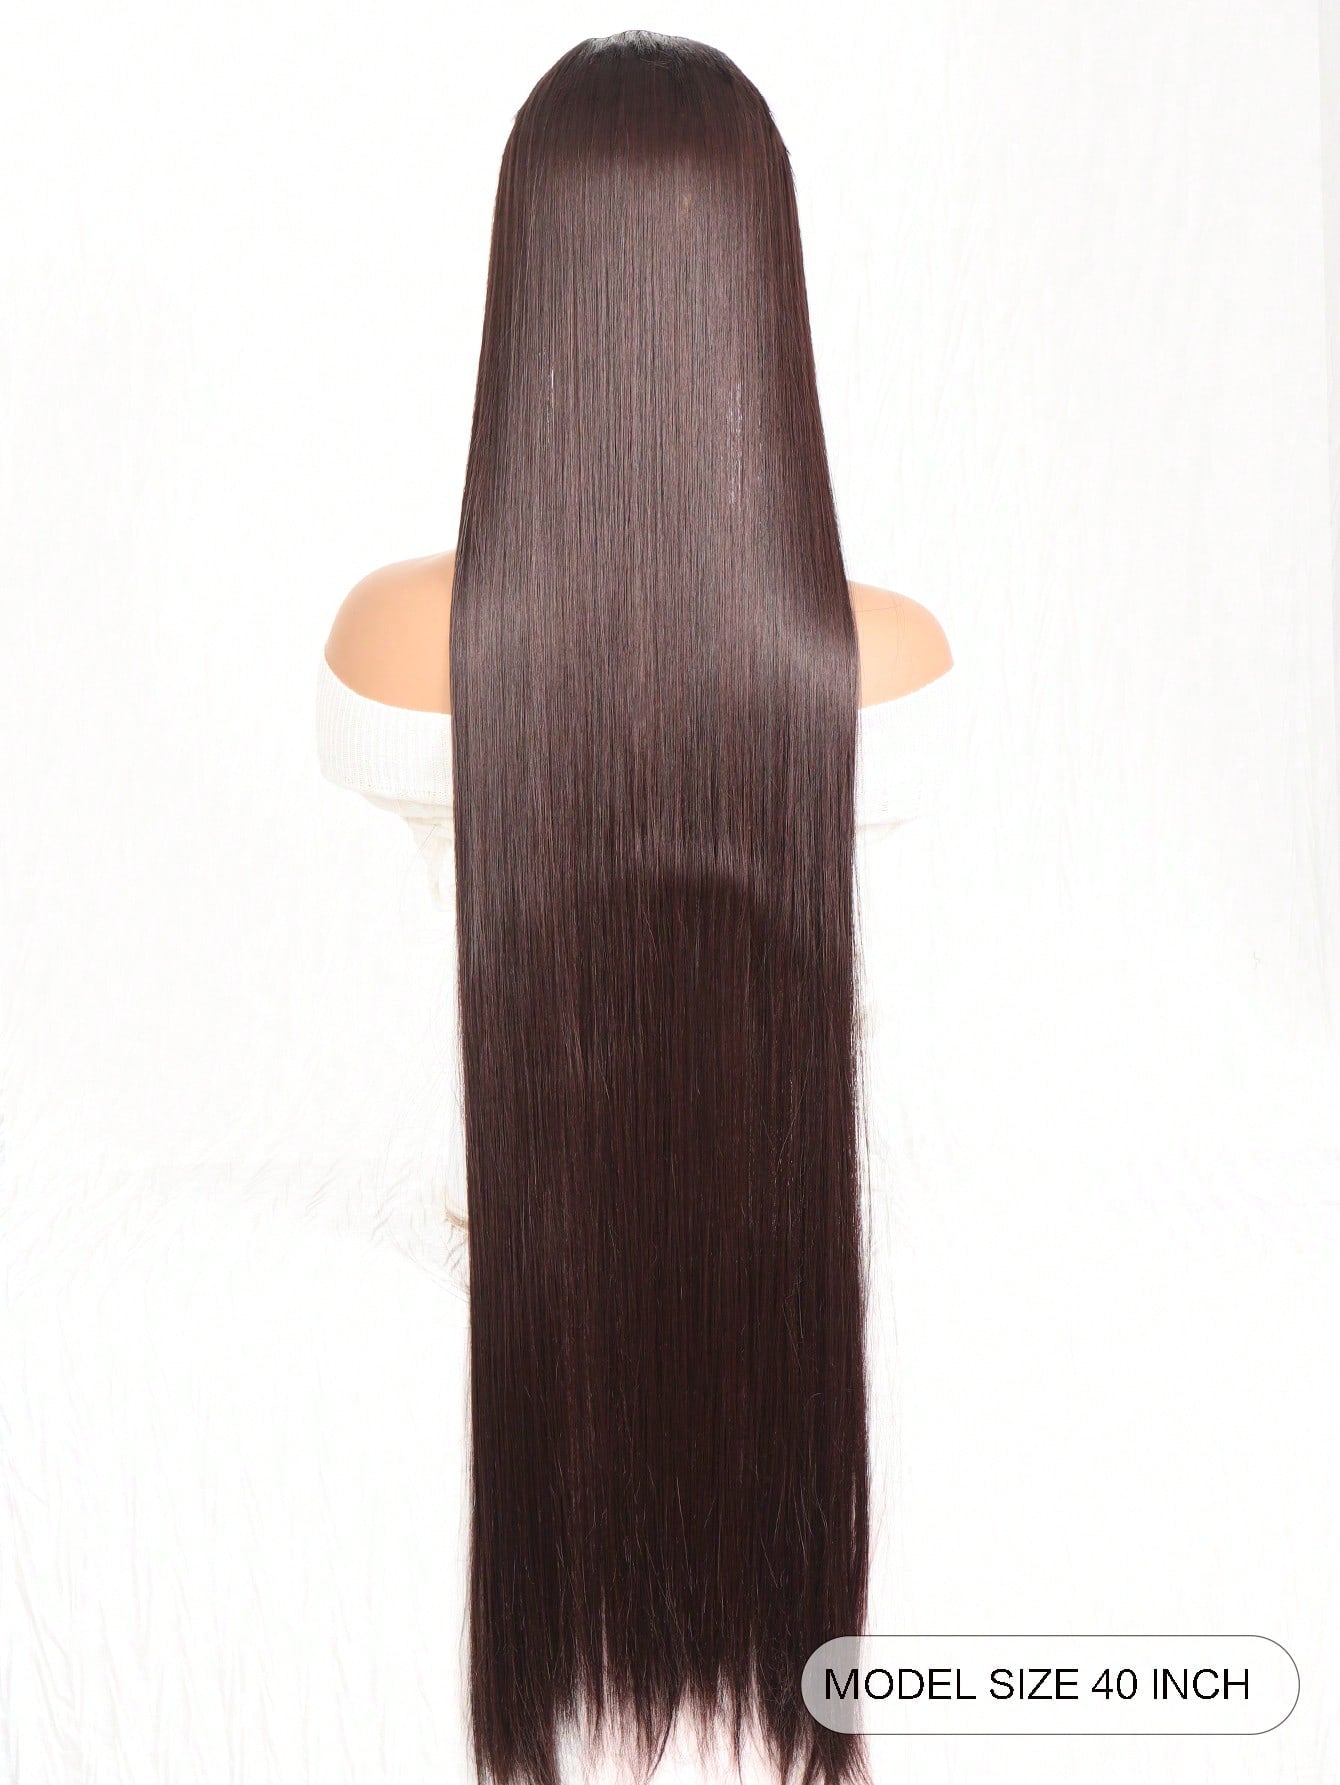 Clip In Hair Extensions 20-40 Inch Extra long Straight Brown Mixed Blonde Fake Hairpiece 5 Clips Synthetic Hair Extensions For Women Daily Use - Negative Apparel